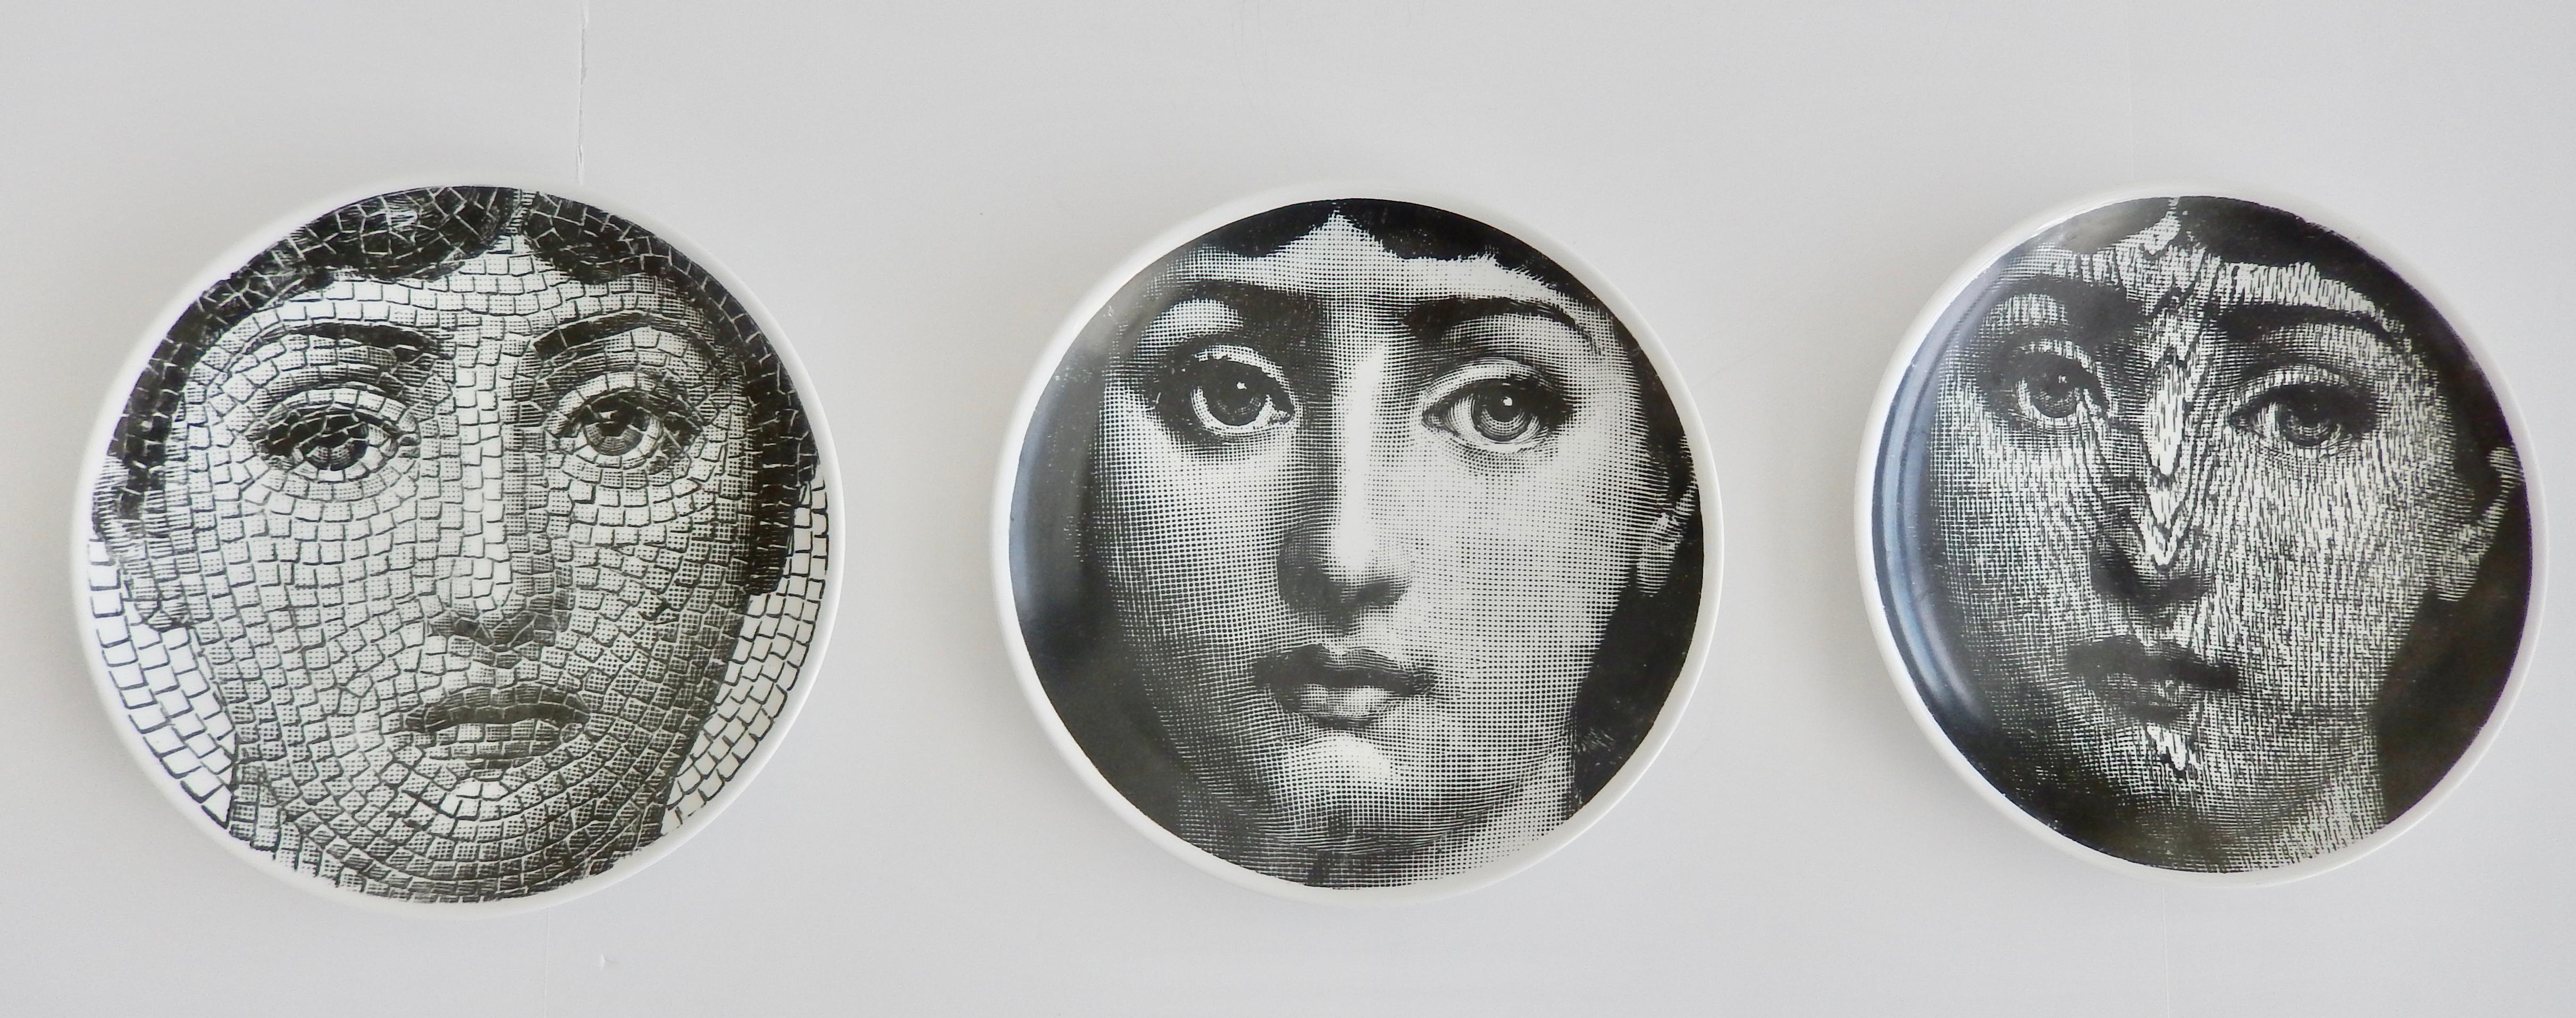 Italian Midcentury Fornasetti Iconic Face Plate, Tema e Variazoni N1 For Sale